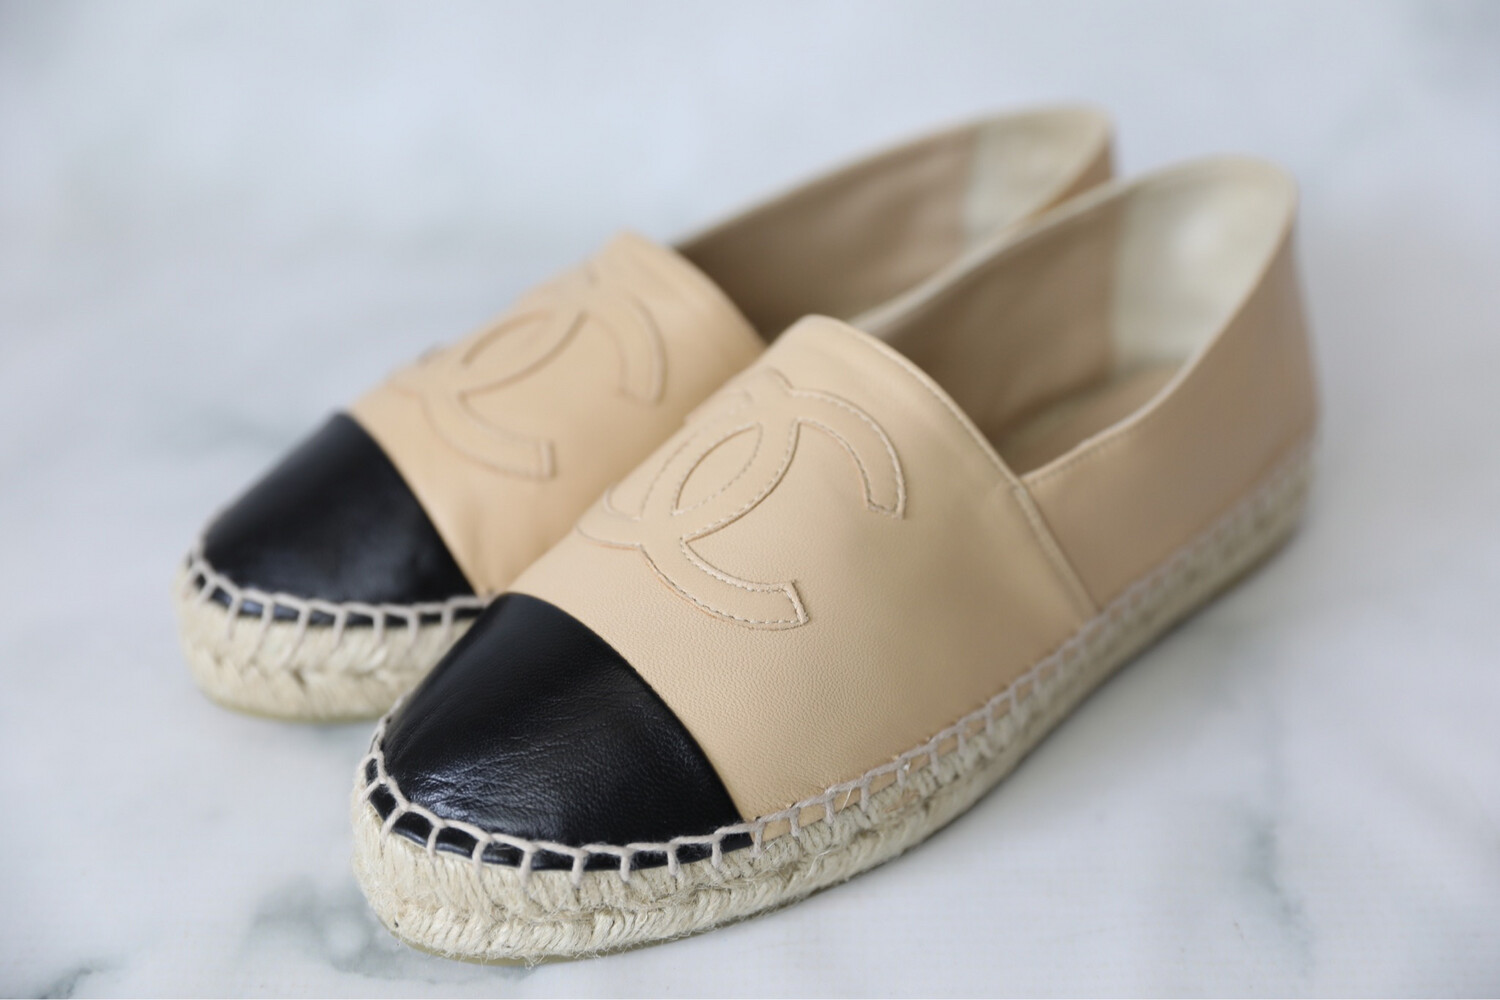 New in box Chanel Espadrilles Size 38 Lambskin shoes